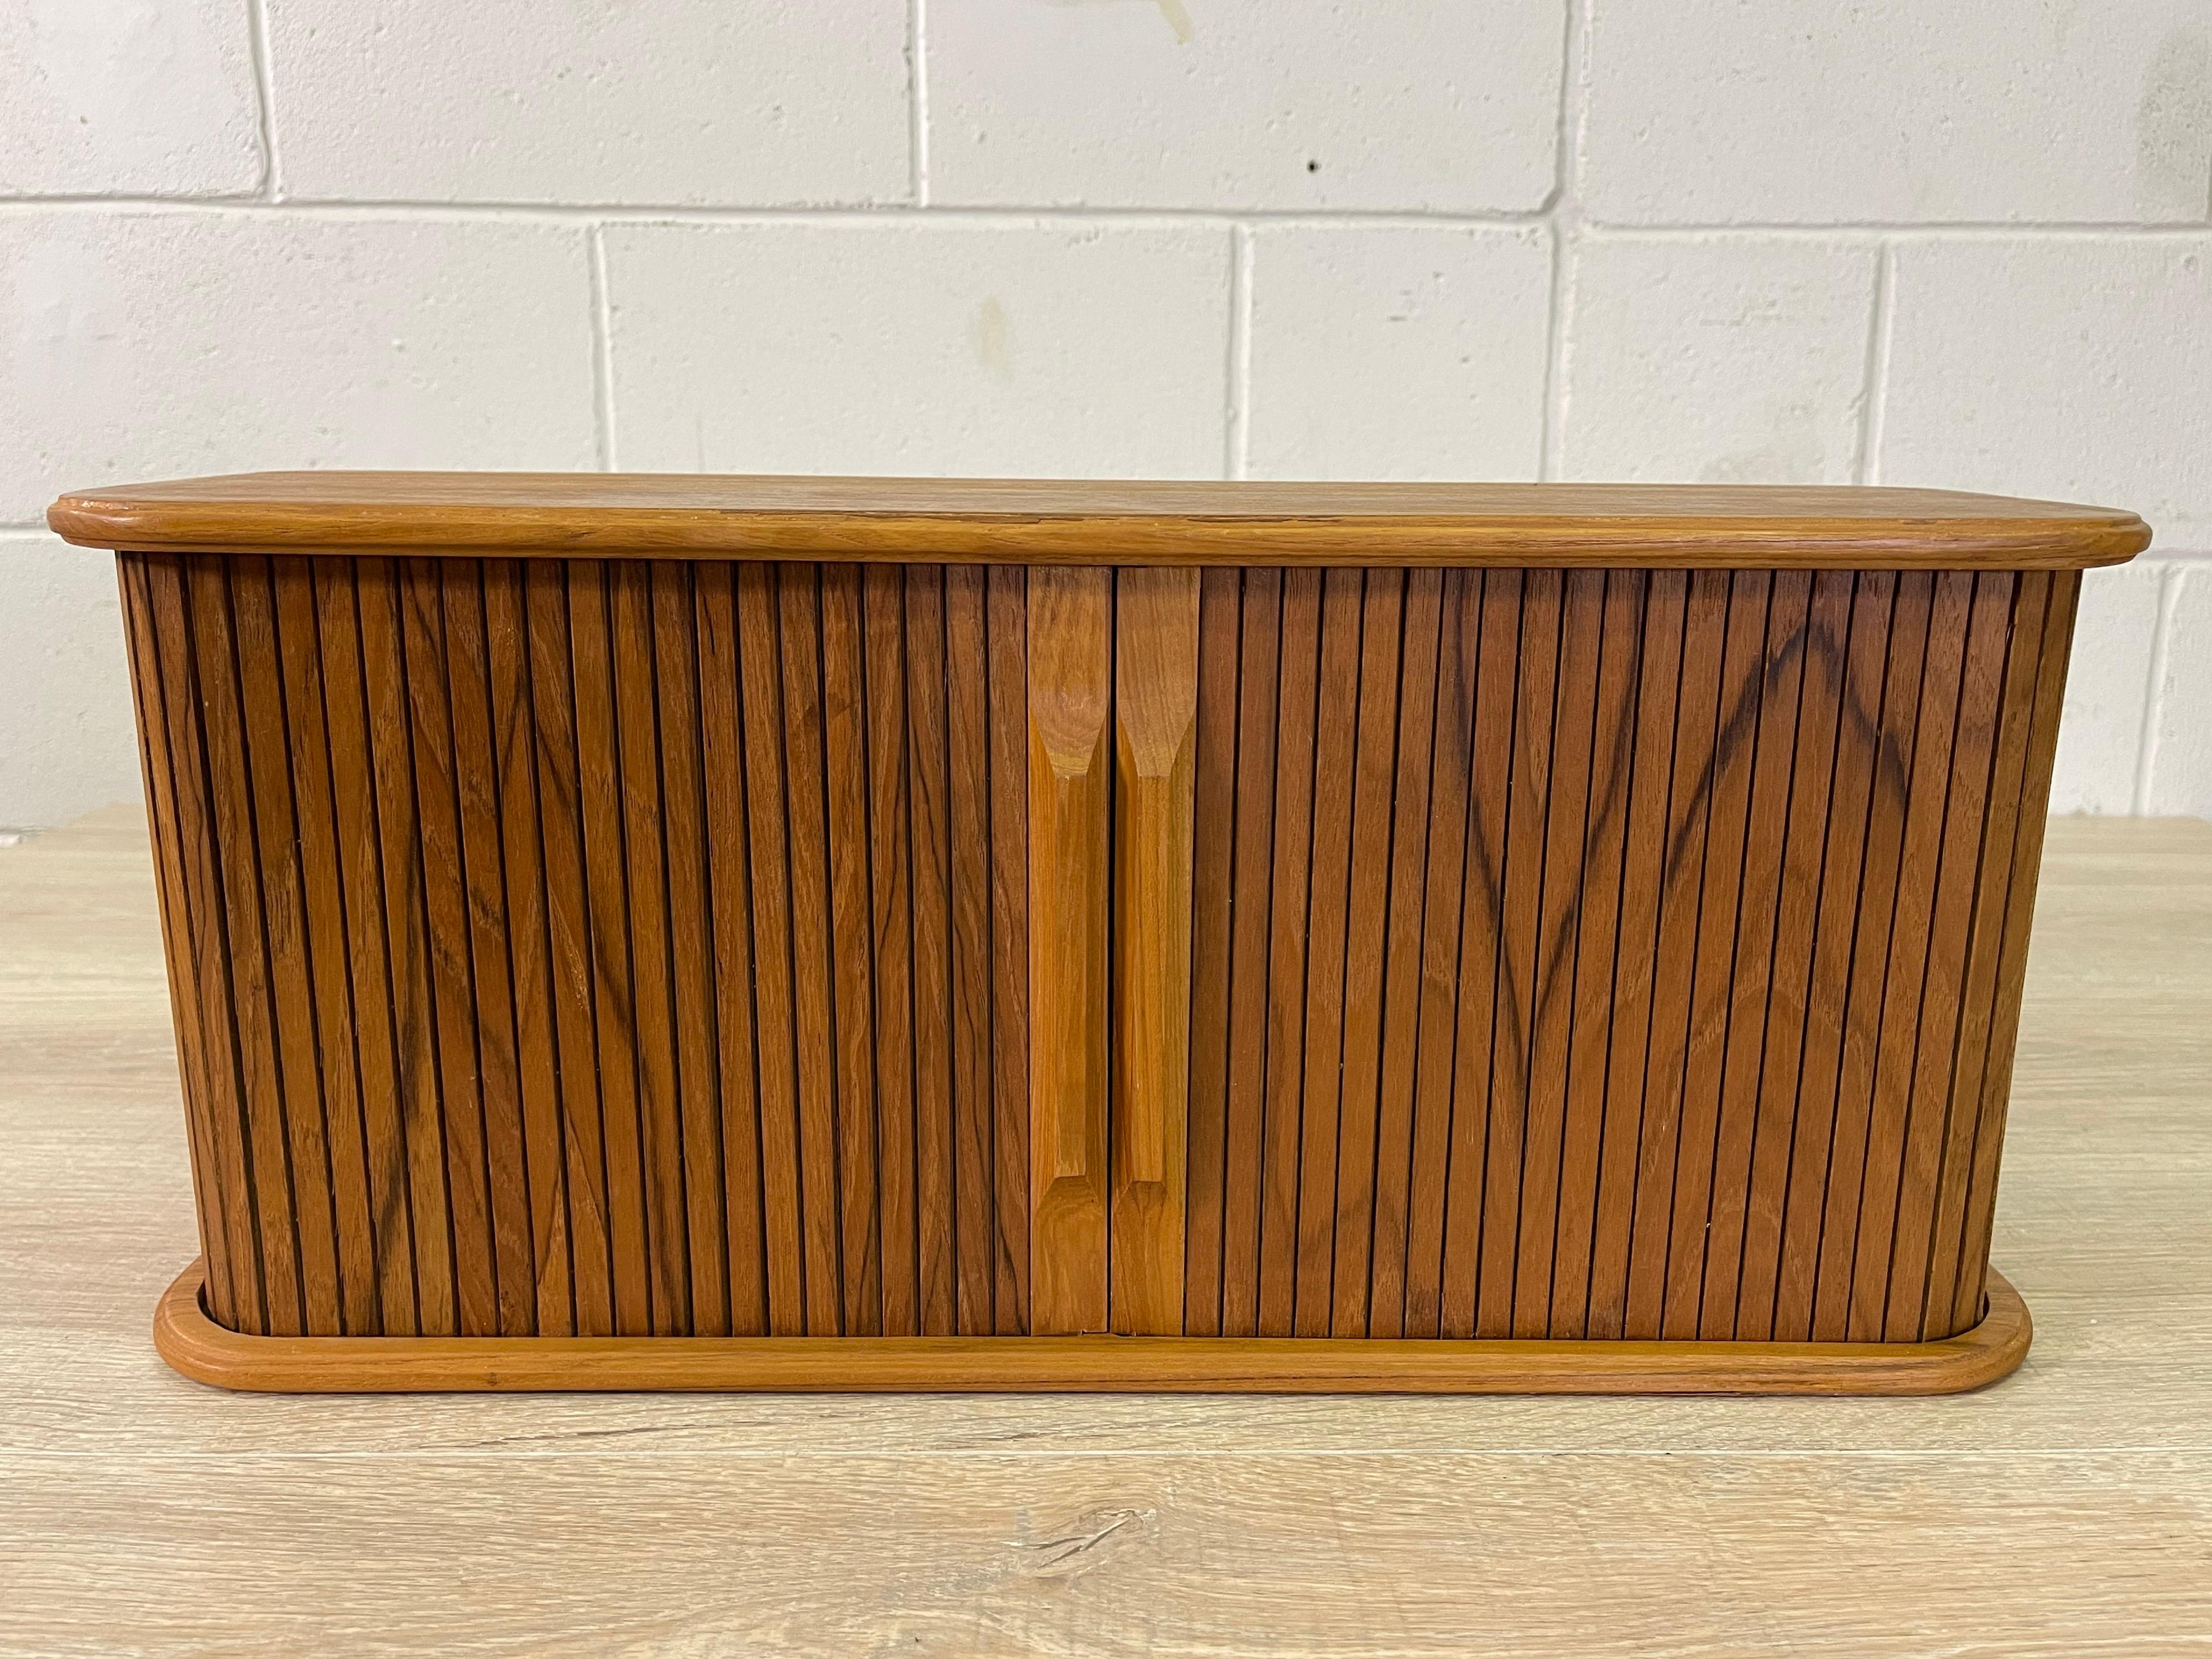 Vintage 1970s teak tambour door wall hanging shelf. Great two shelf design that hold lots of small objects. Hardware is included. Marked.